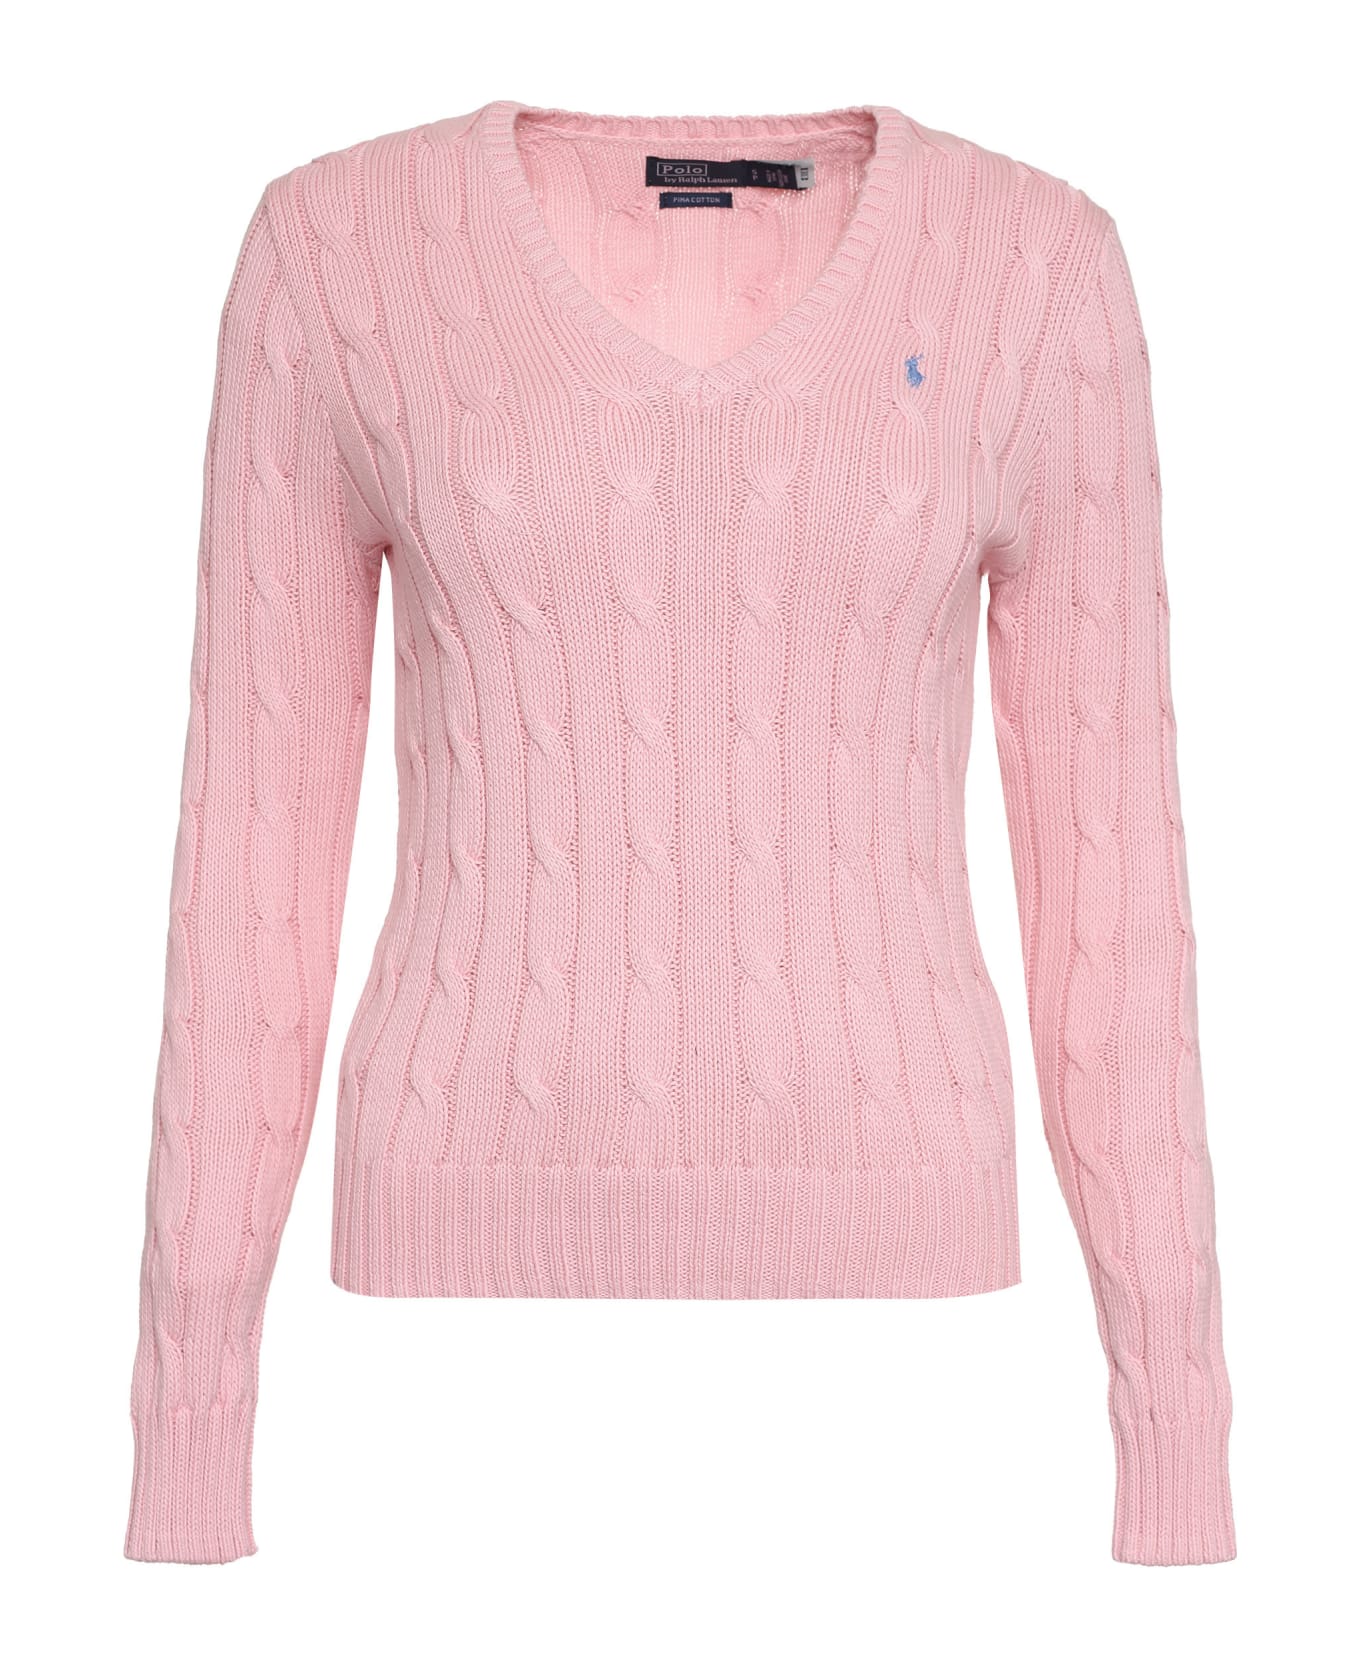 Polo Ralph Lauren Cable Knit Sweater - Pink